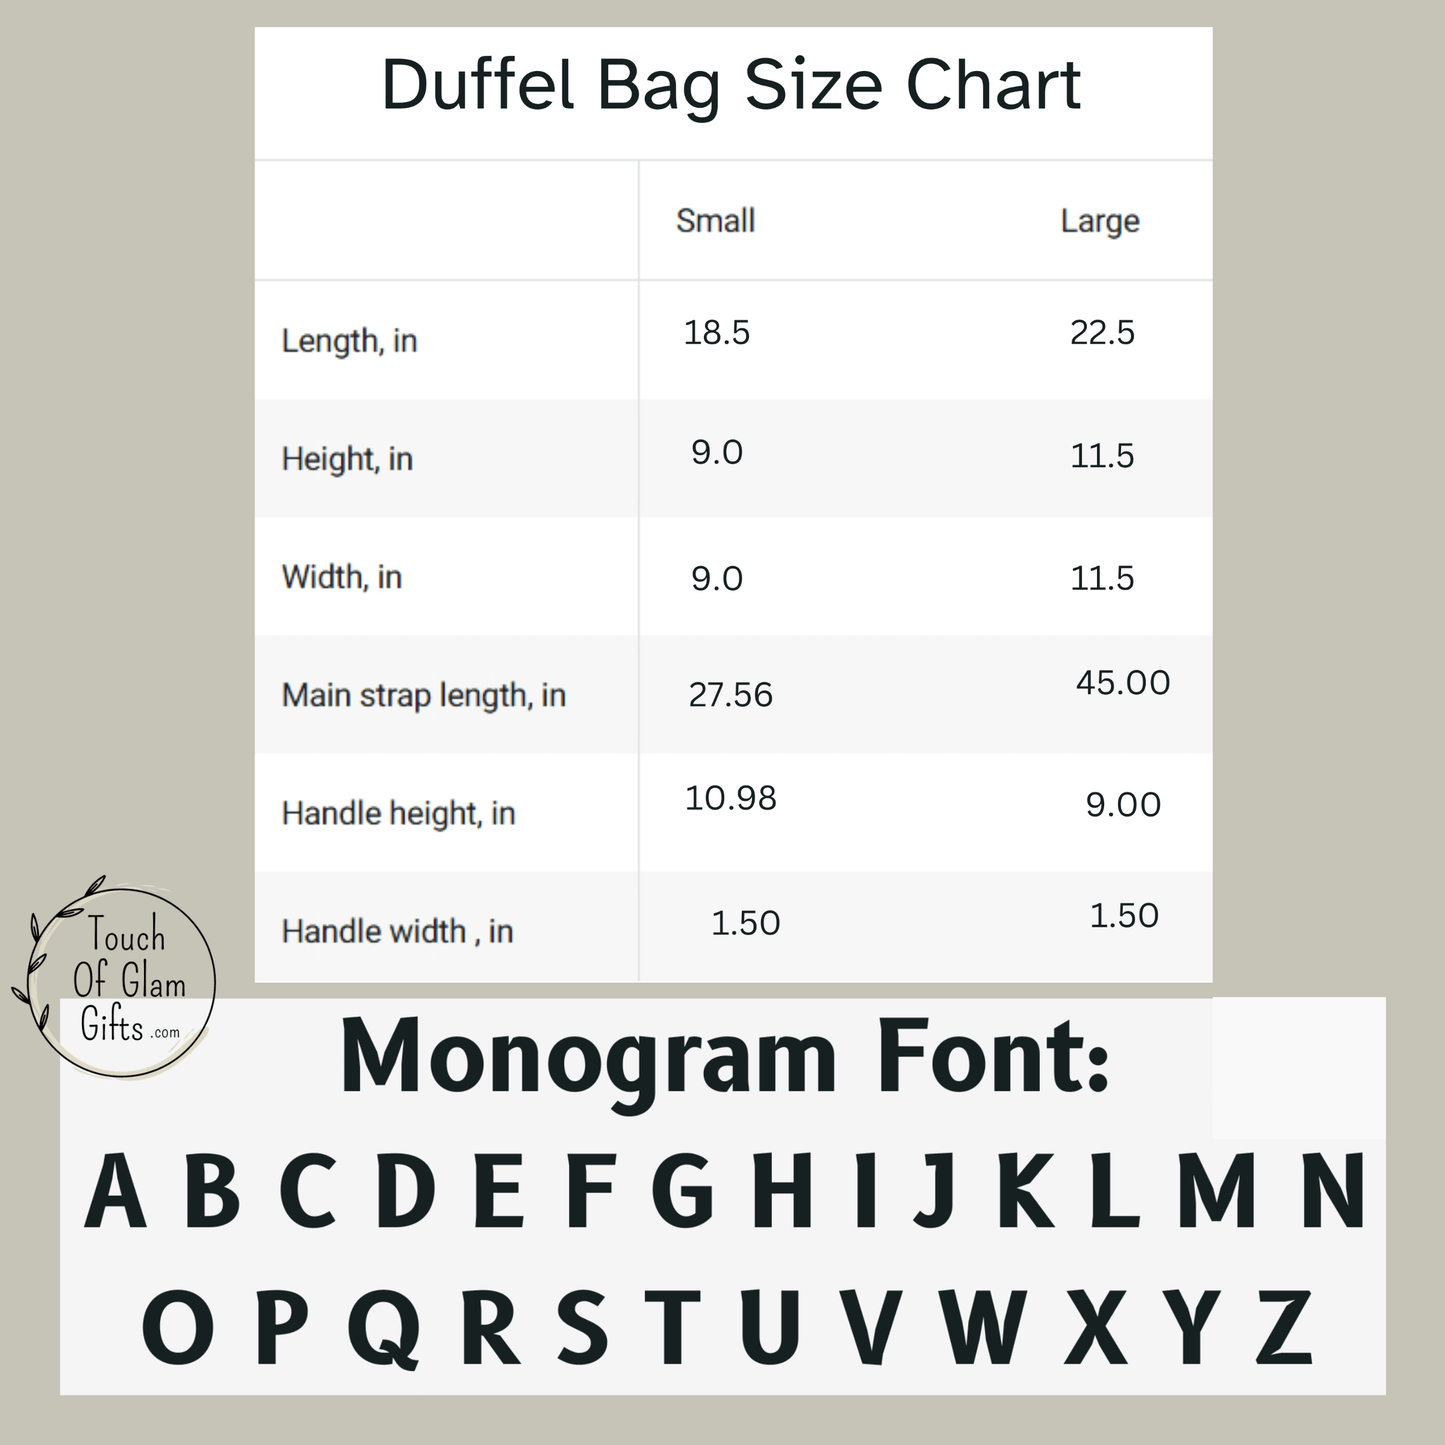 A size chart for the duffel bag shows length, height, width, strap lengths and the monogrammed font.